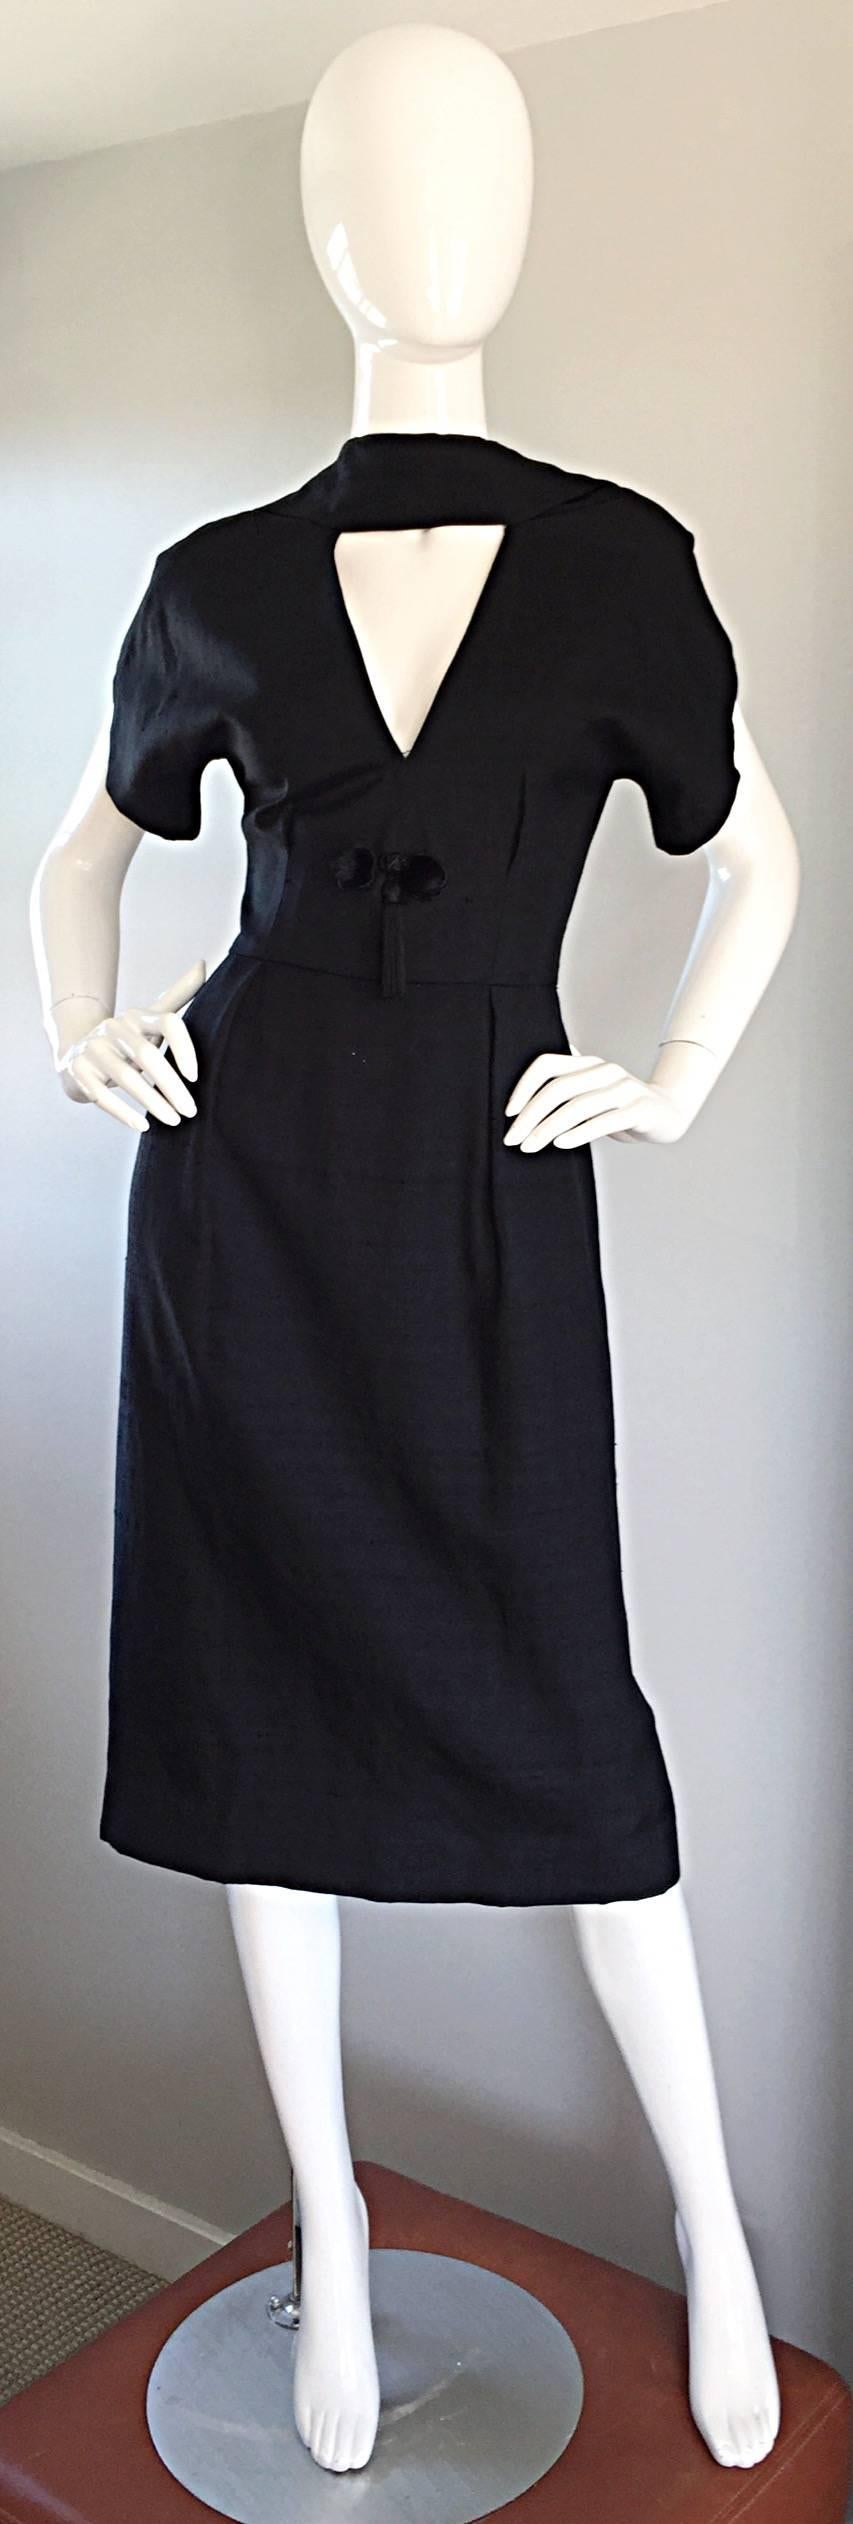 Extraordinary vintage 50s ESTEVEZ black silk dress! The detailing on this beauty is breathtakingly unbelievable! Features cut-out at bust, with dolman 40s style sleeves. Two mink fur pom poms adorn the waist, along with a black tassel. Amazing